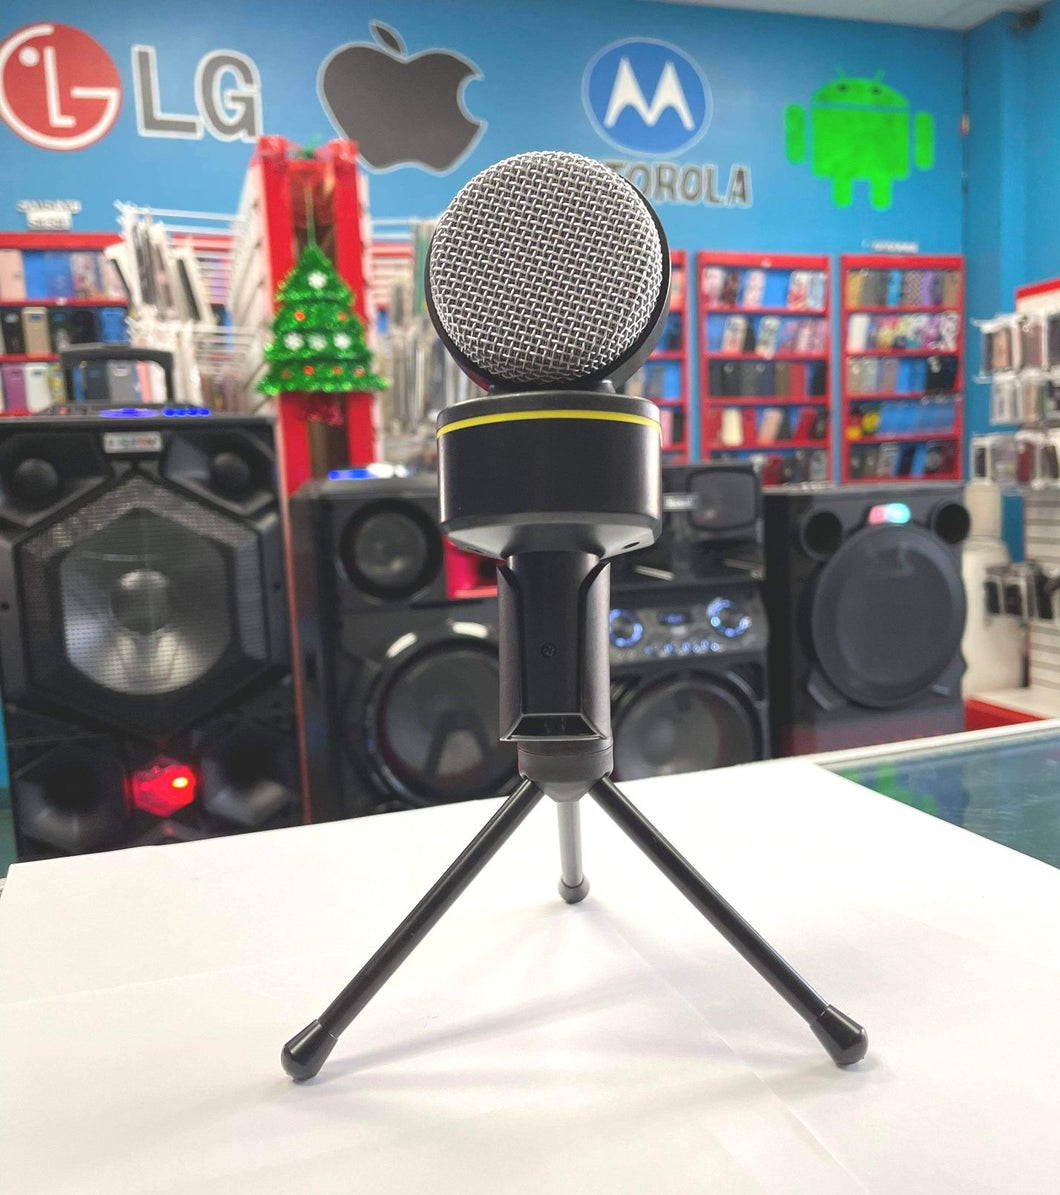 MULTIMEDIA CONDENSER MICROPHONE FOR YOUTUBE VIDEOS, TIKTOKS,VIDEO GAMING, PODCAST, AND SO ON. MODEL: SF-930